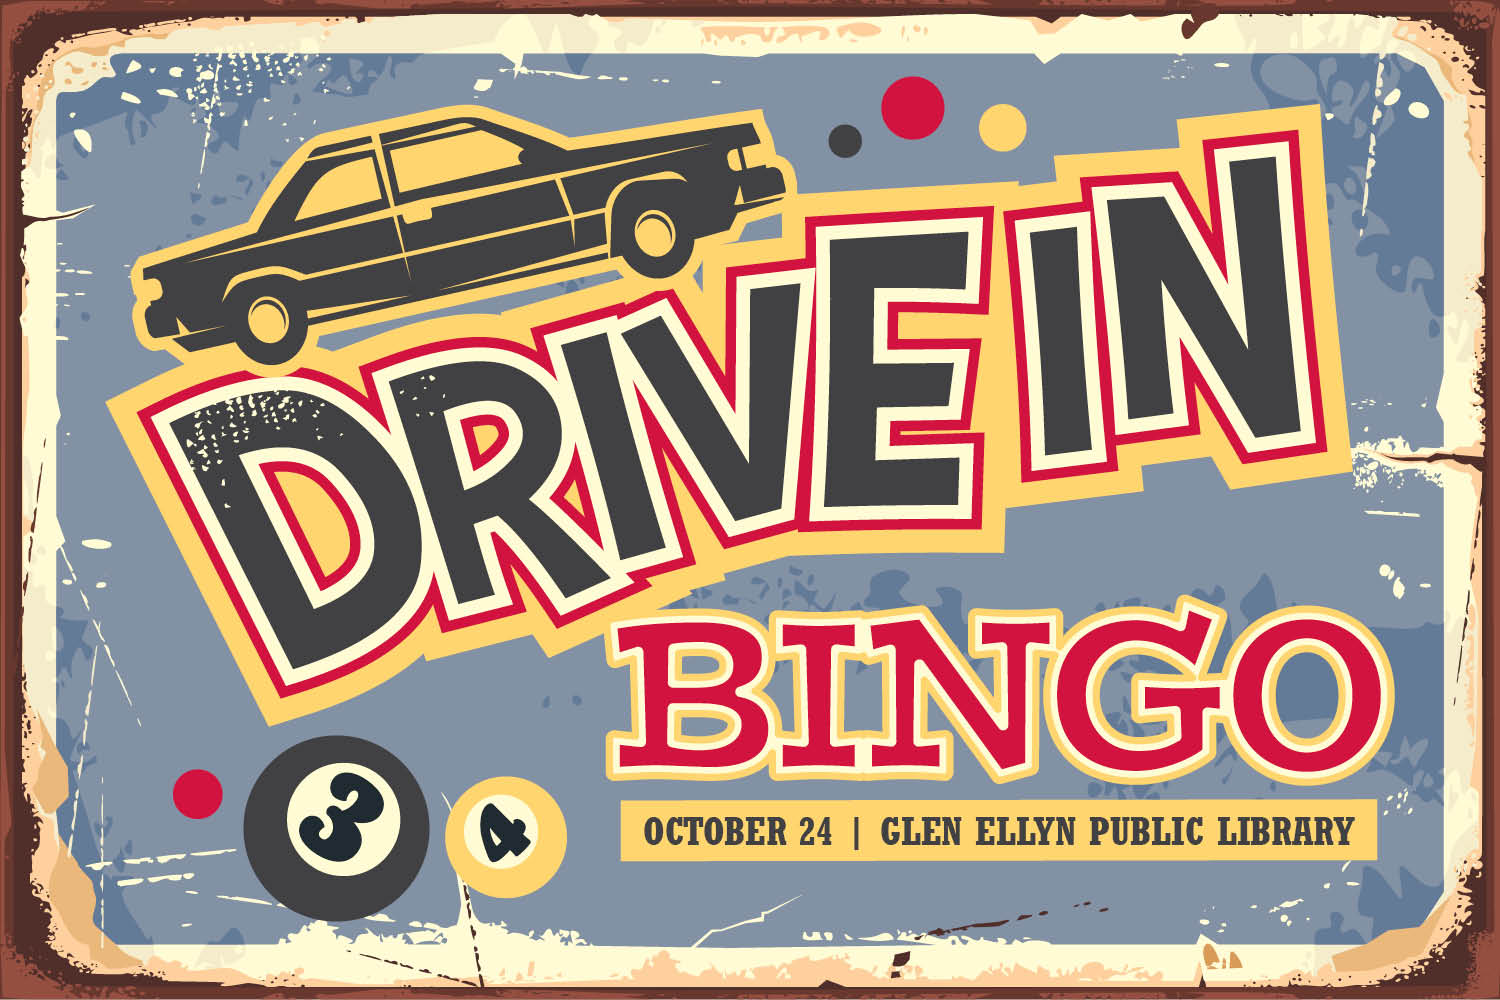 retro-style image of car and words drive in bingo